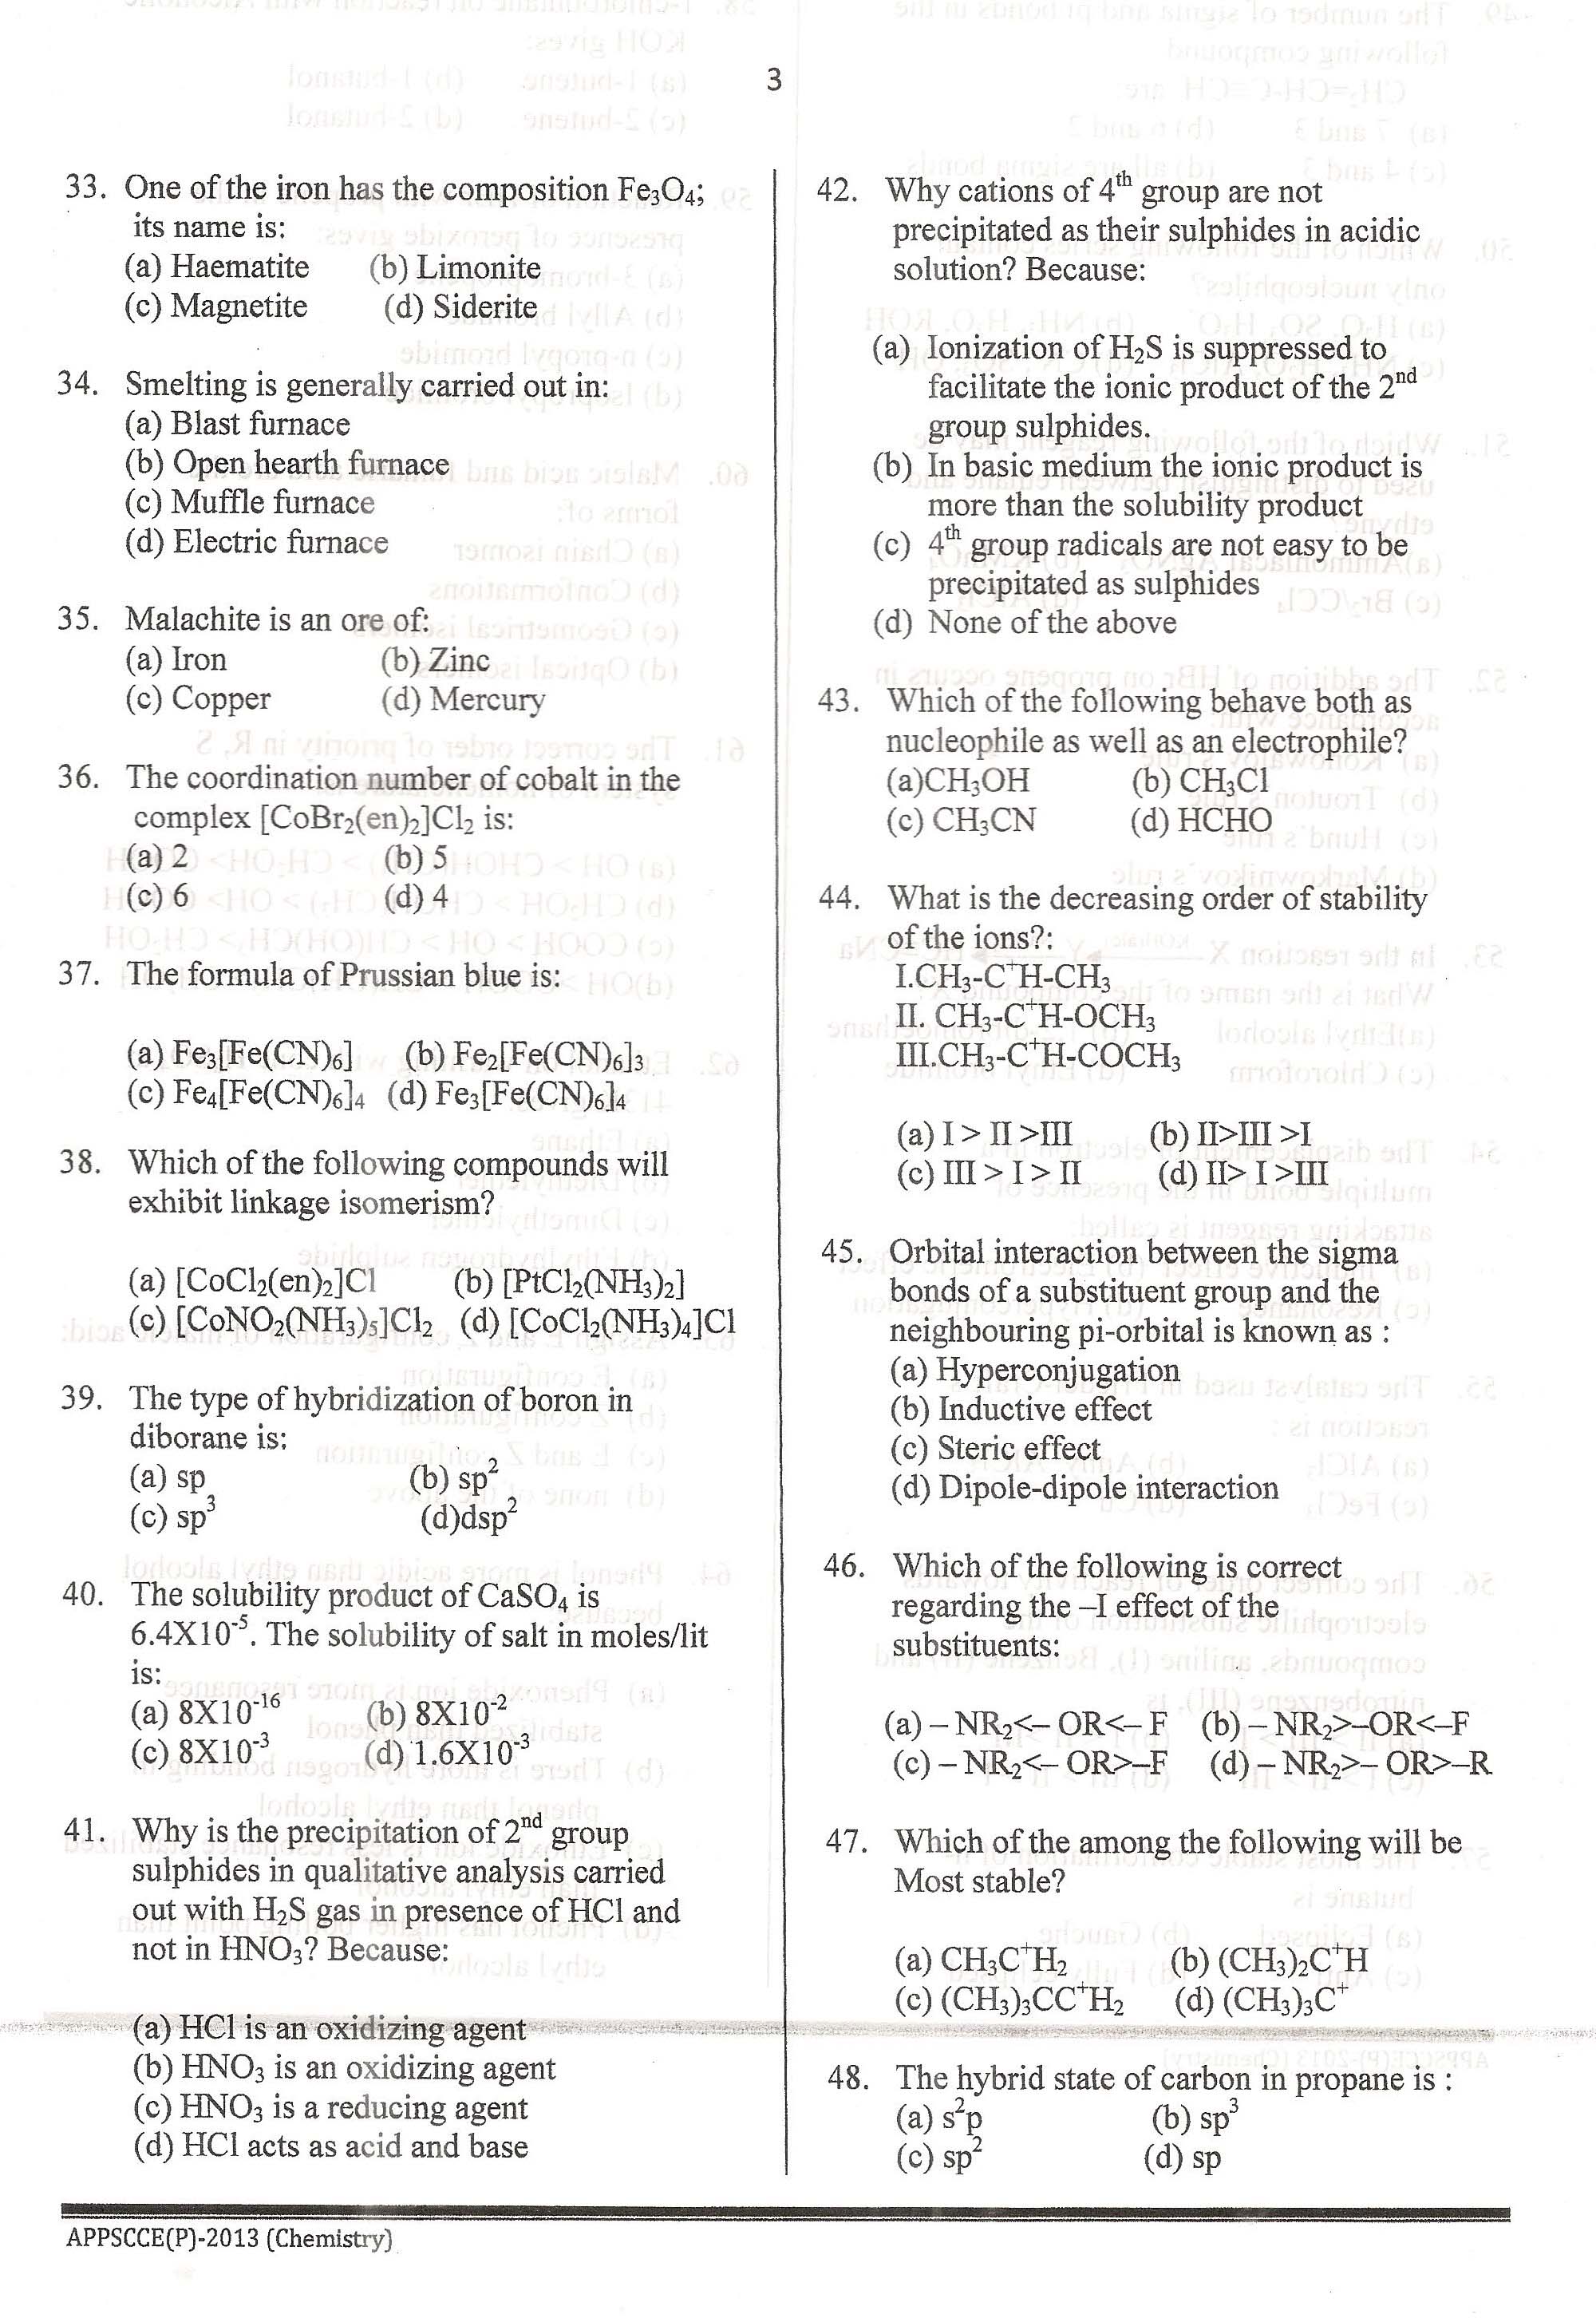 APPSC Combined Competitive Prelims Exam 2013 Chemistry 4